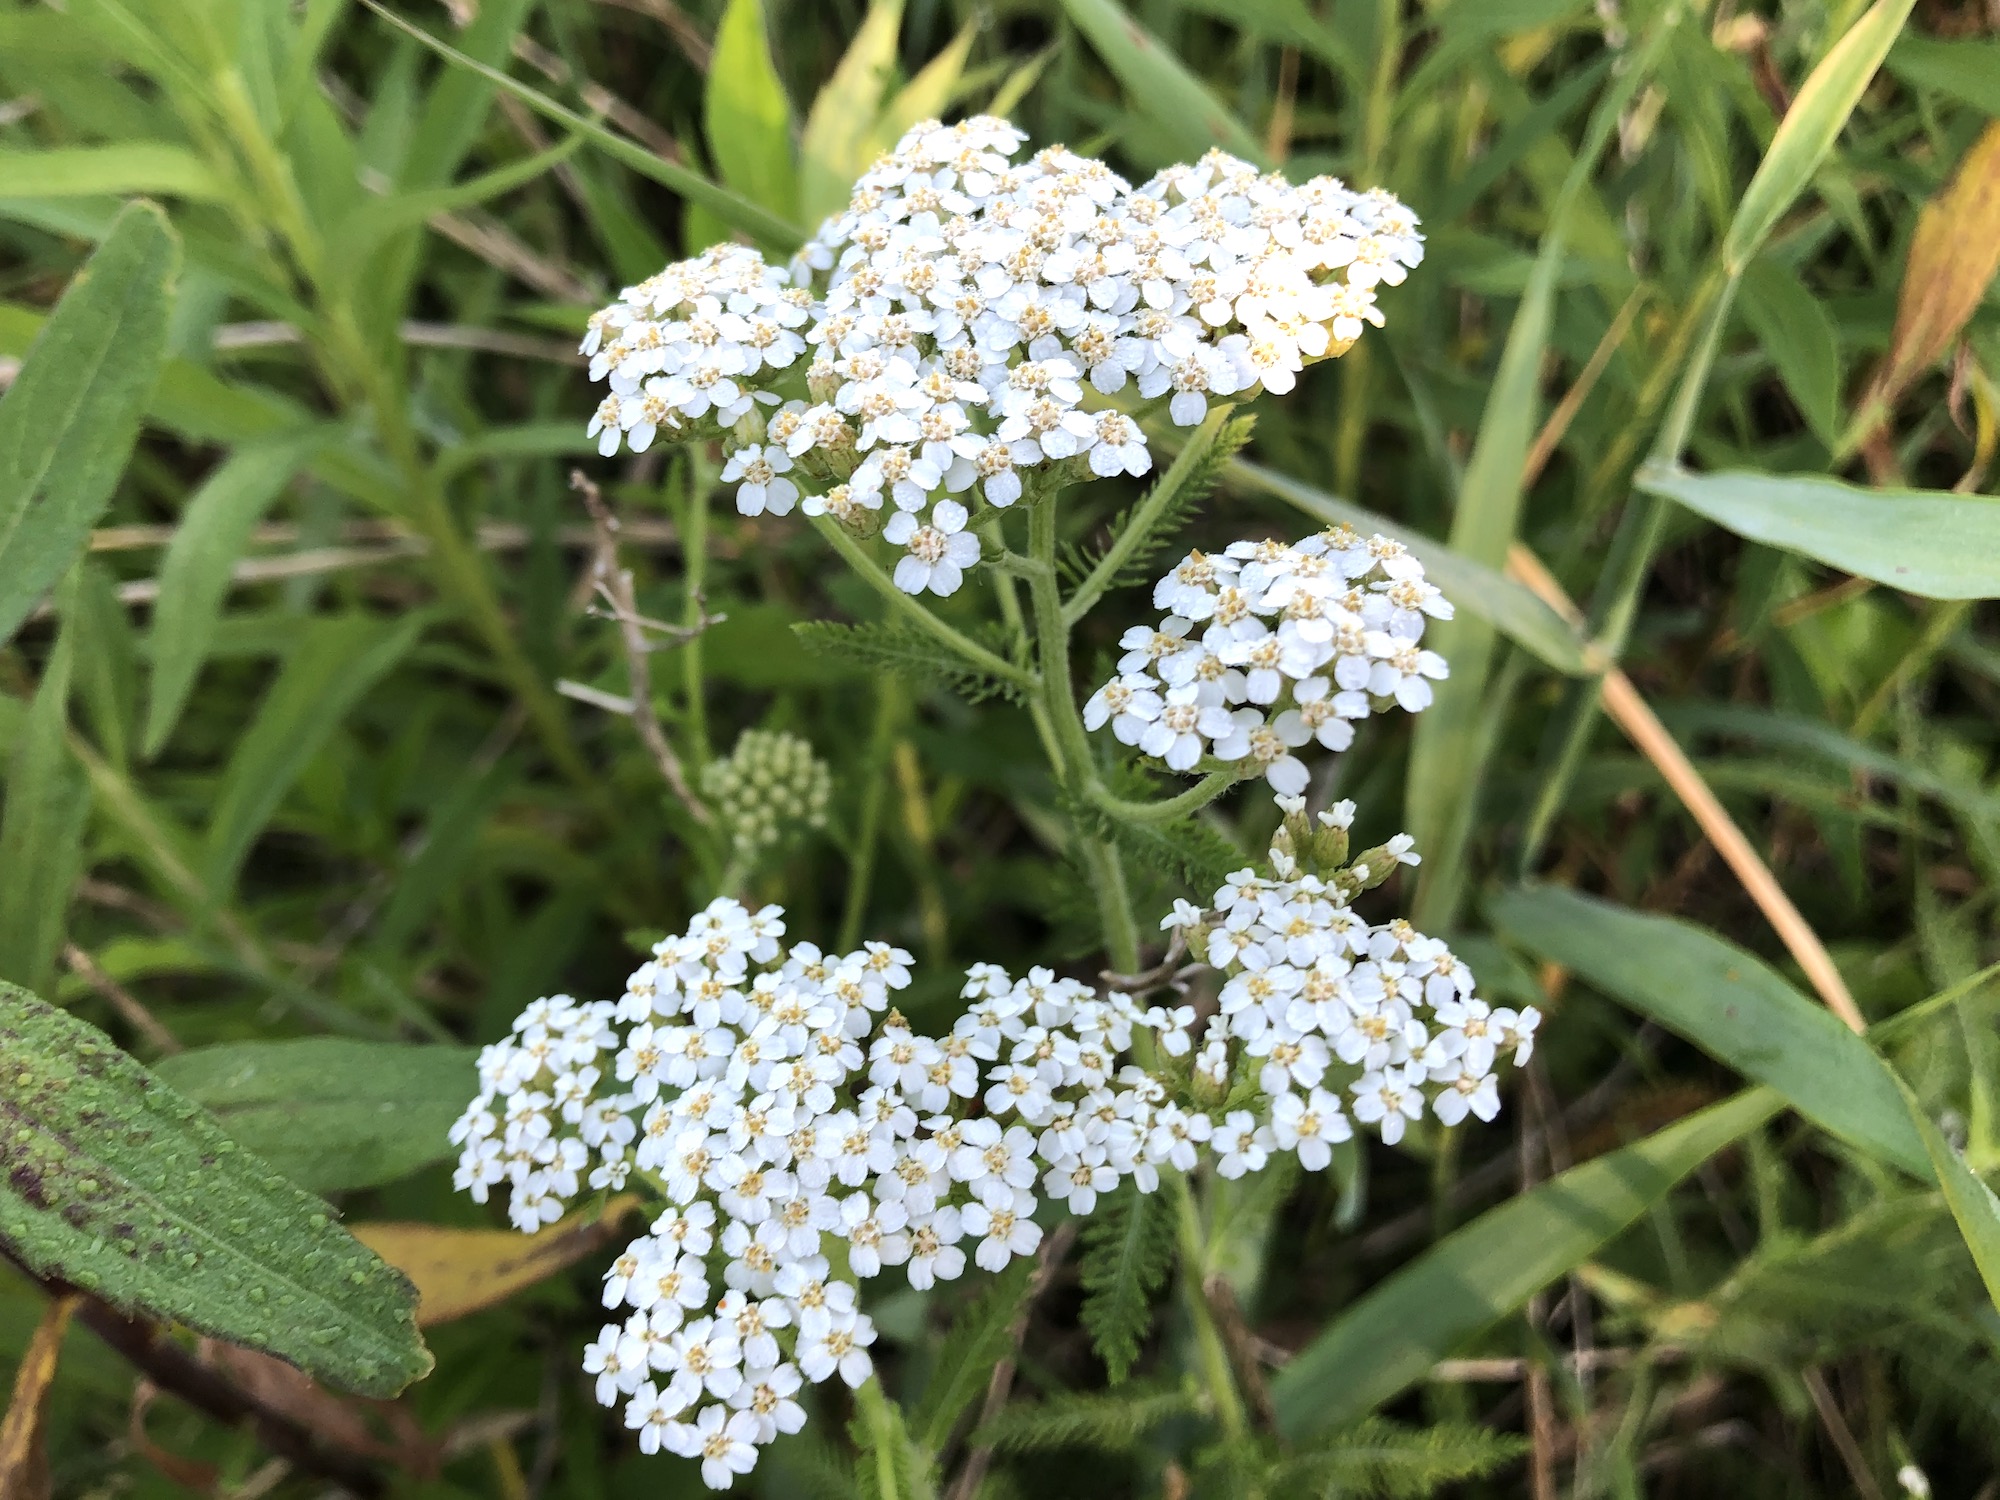 Common Yarrow on shore of Marion Dunn Pond on June 16, 2020.